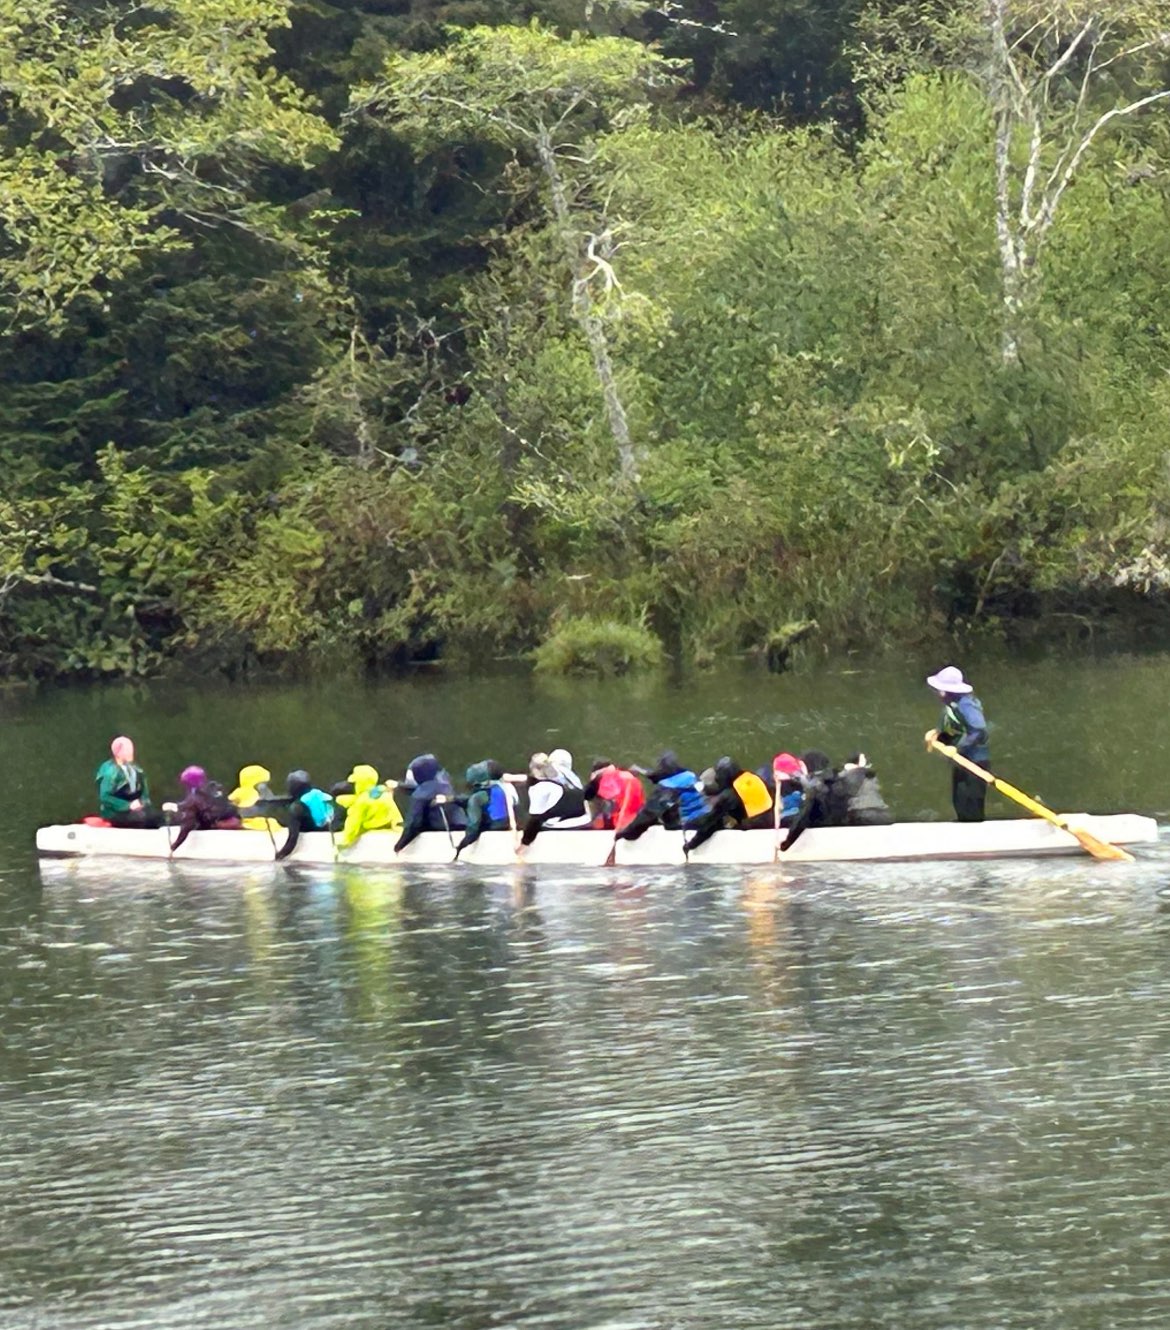 Dragon Boat team at practice on a river